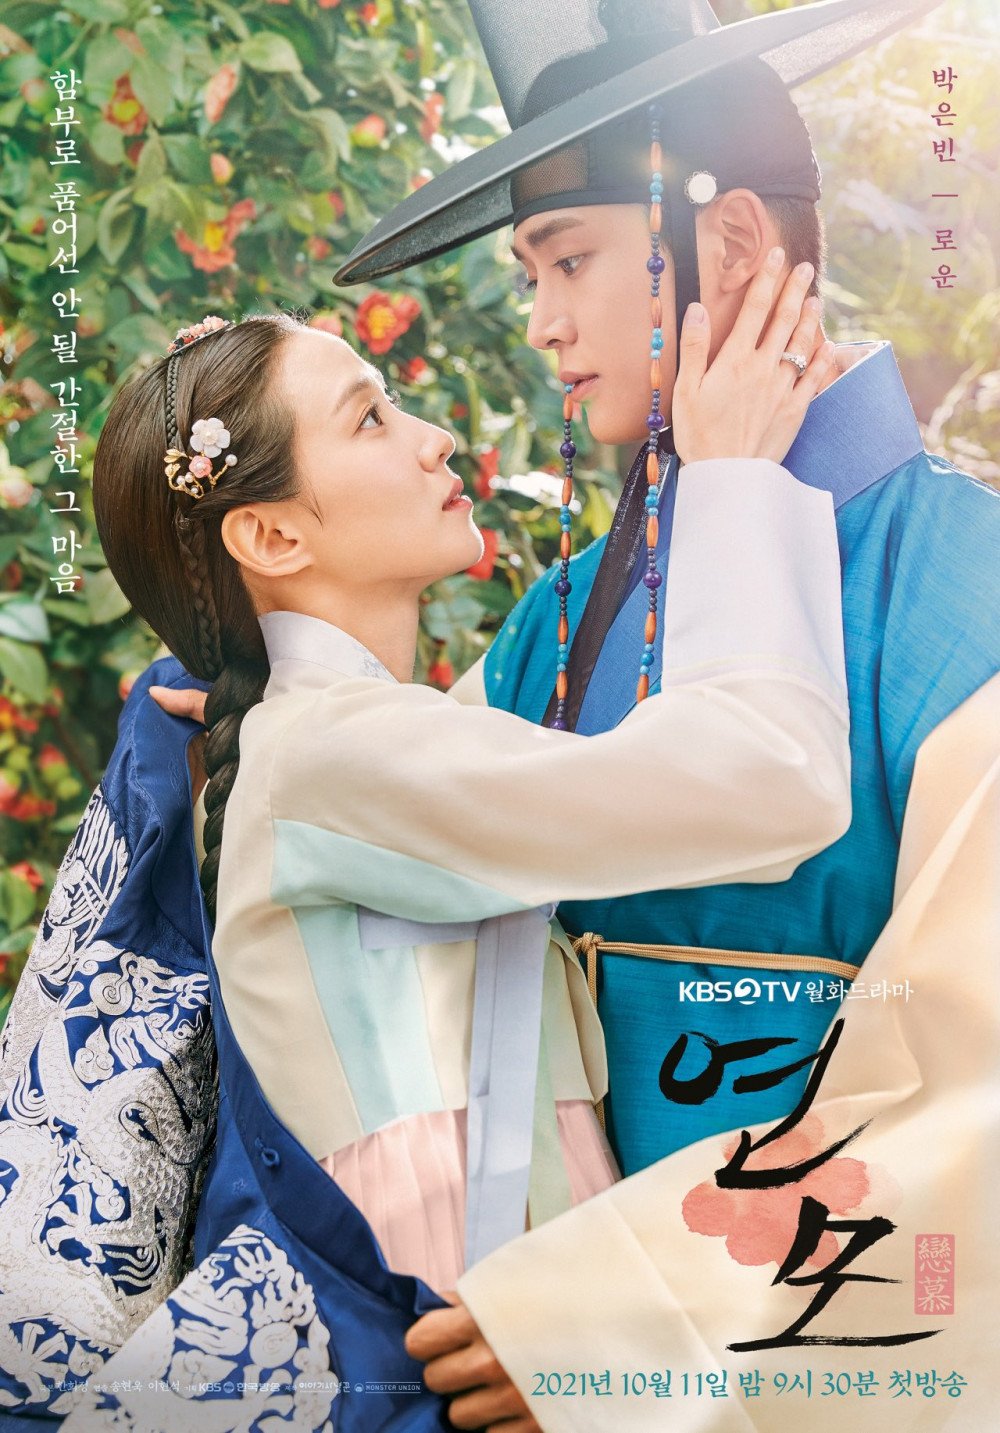 Park Eun Bin & SF9's Rowoon - teaser poster for new KBS2 drama 'The King's Affection'